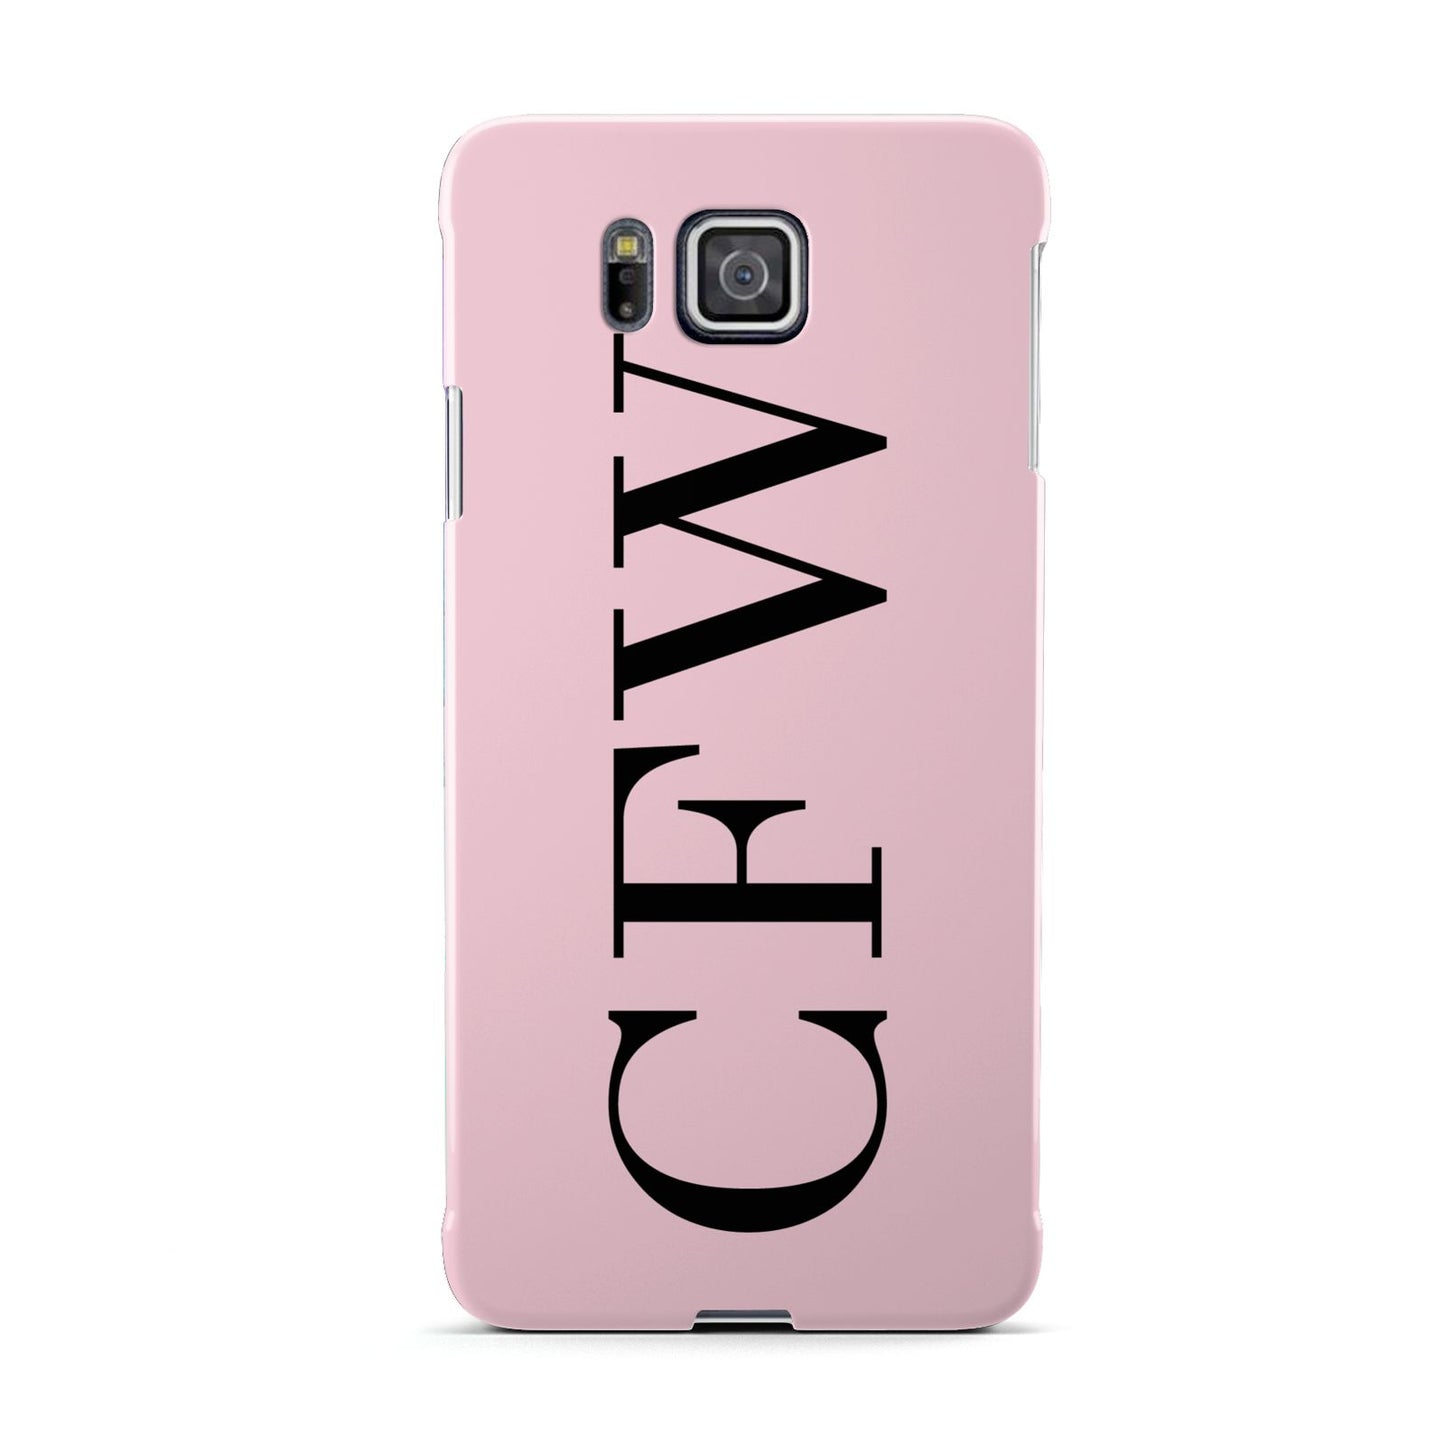 Personalised Black Pink Side Initials Samsung Galaxy Alpha Case